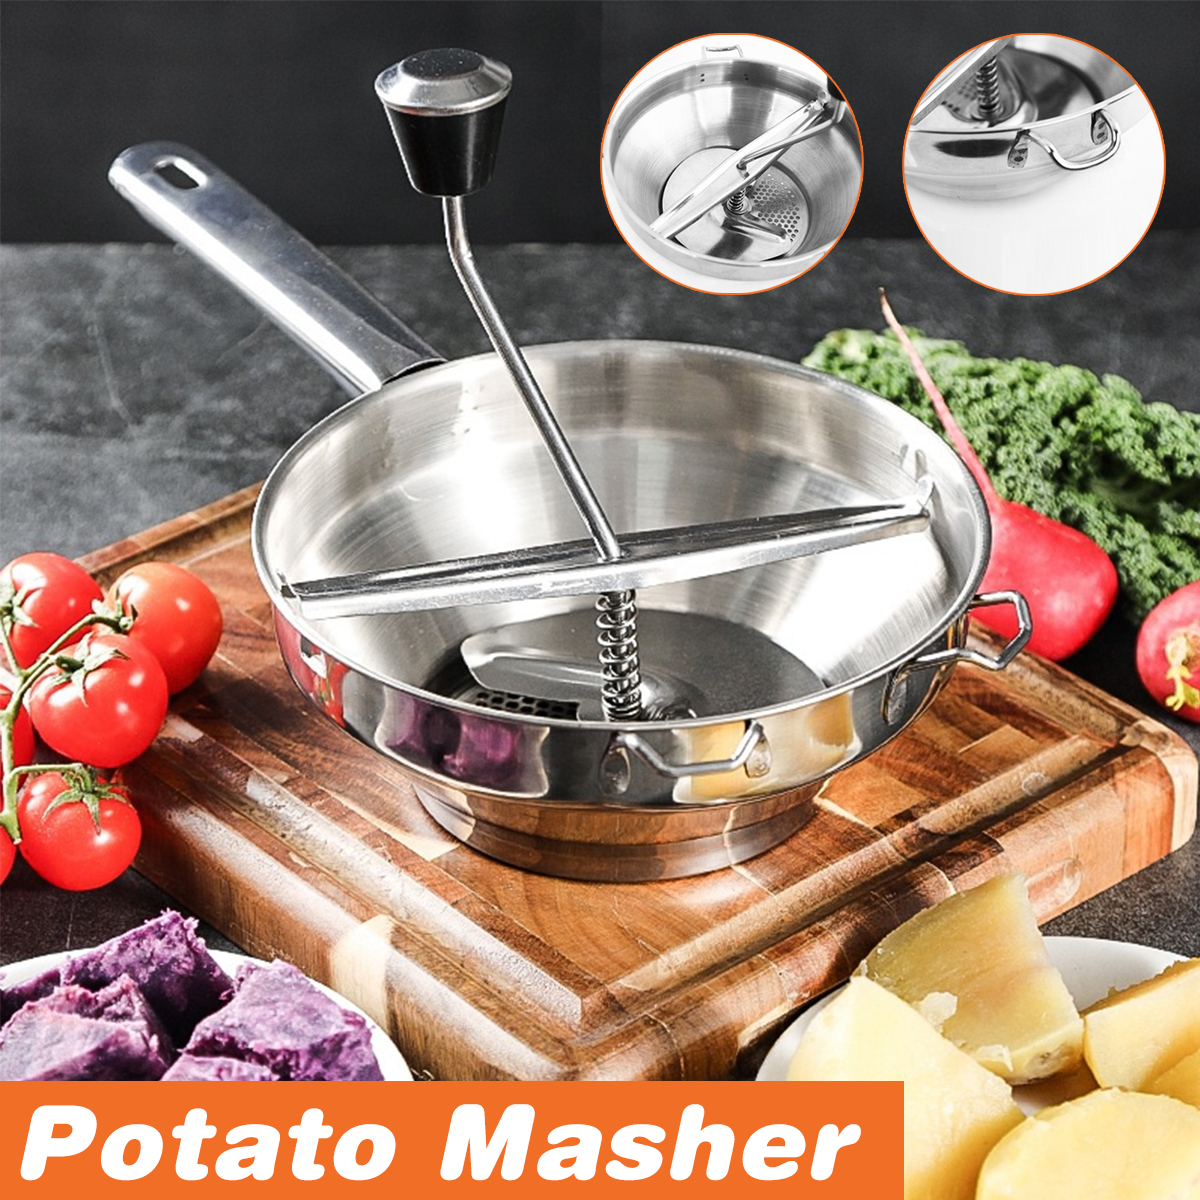 Stainless-Steel-Rotary-Food-Mill-Vegetables-Tomatoes-Masher-Creative-Home-Kitchen-Tools-1778145-1